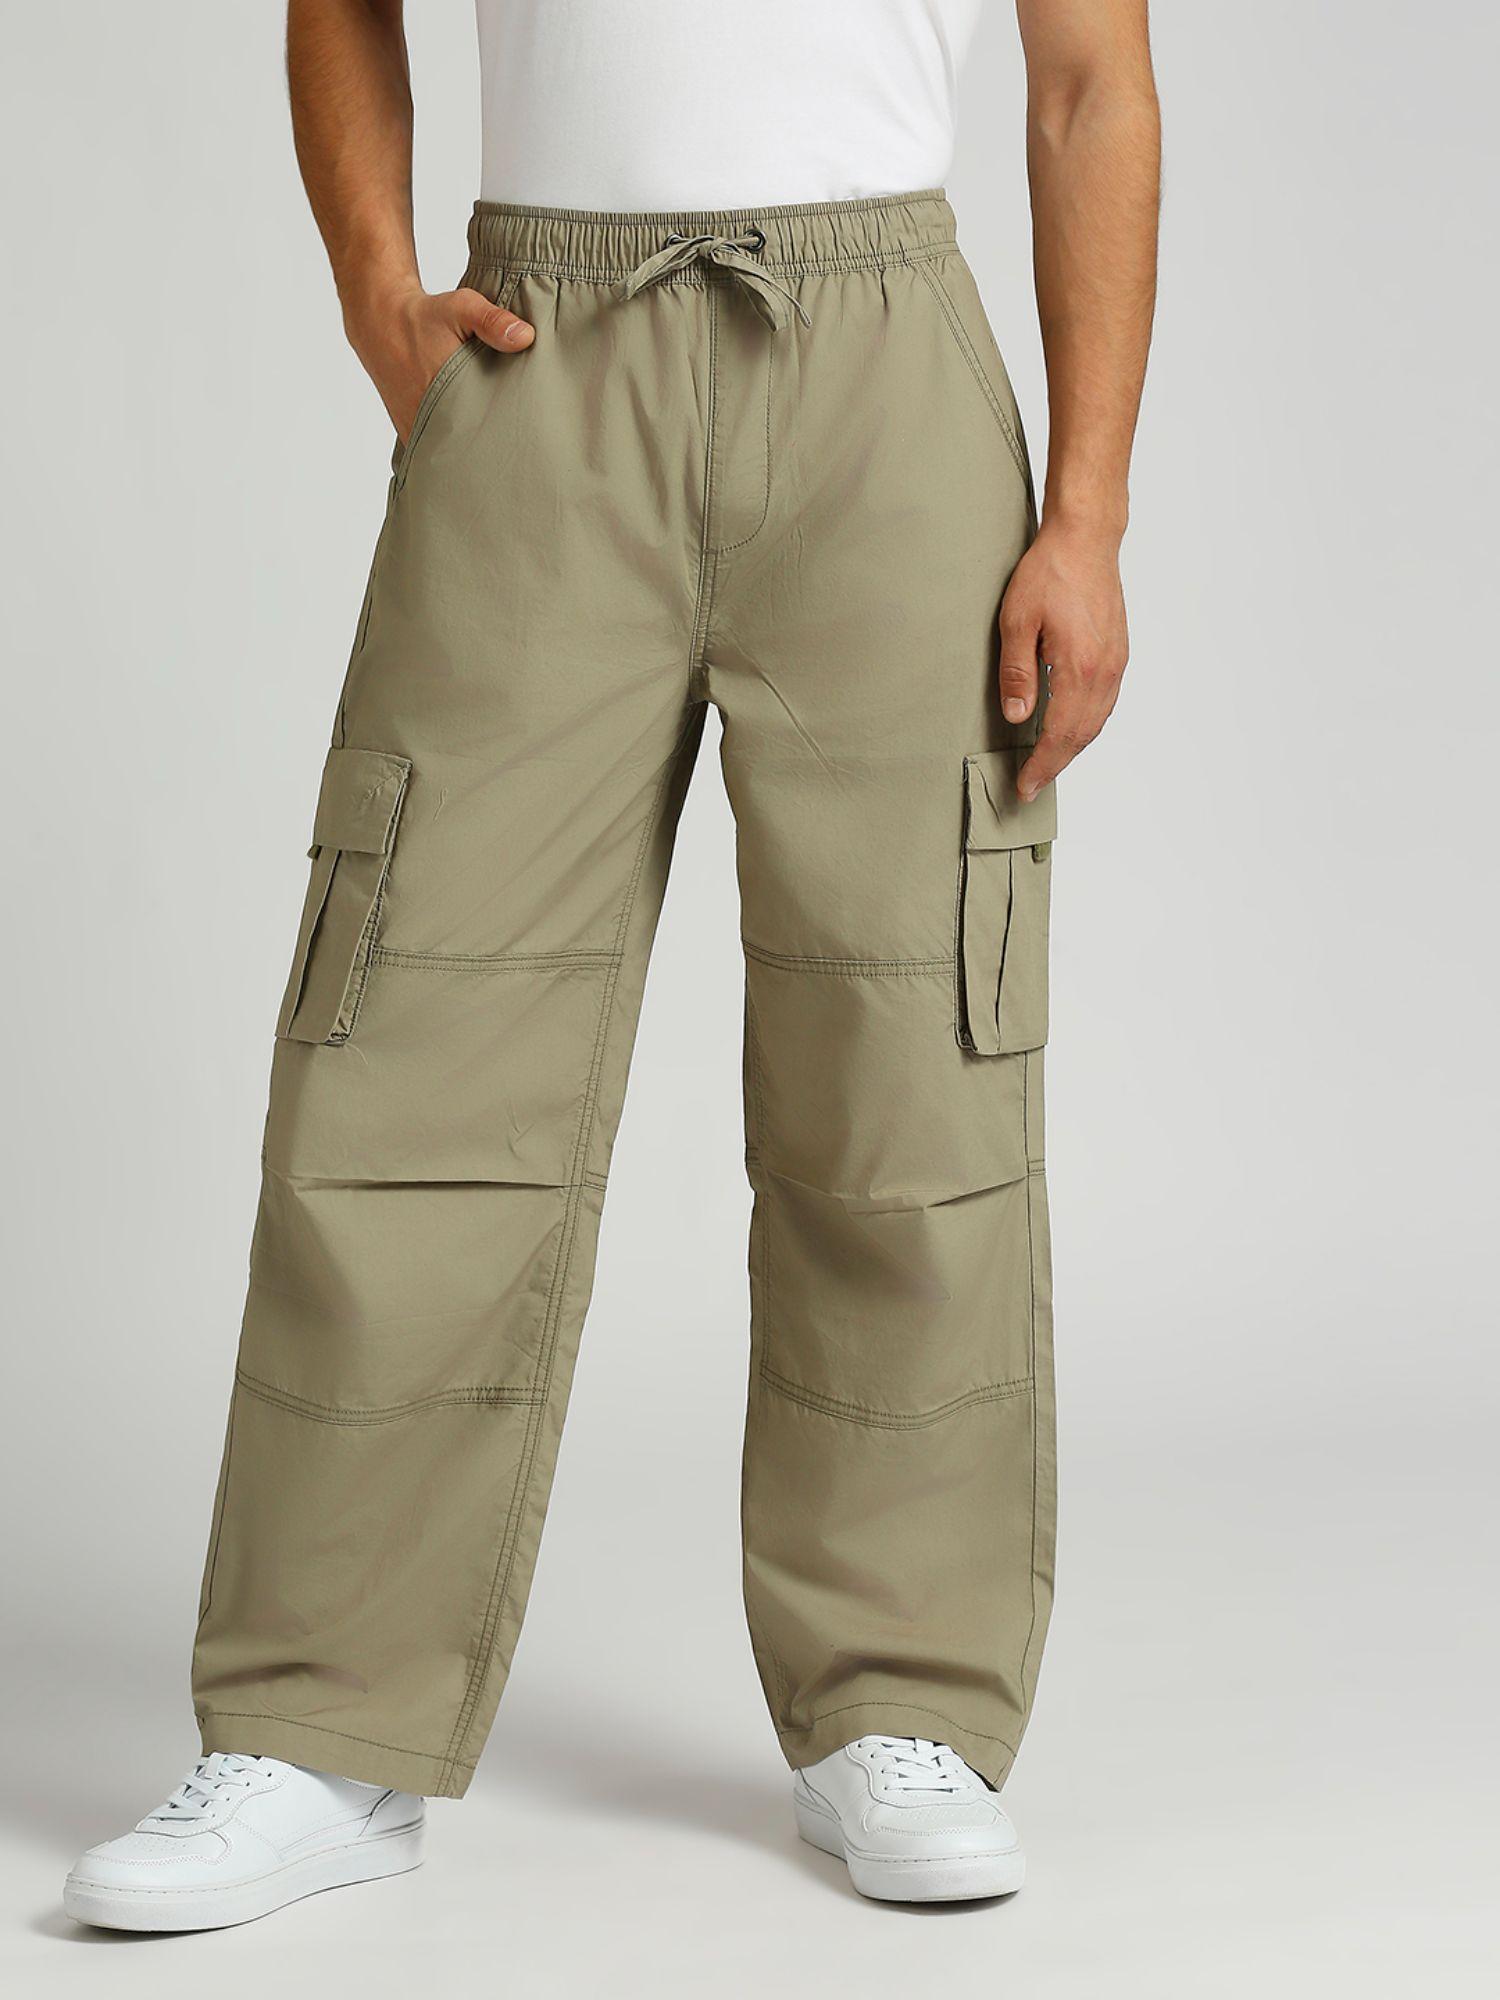 green solid wide cargos